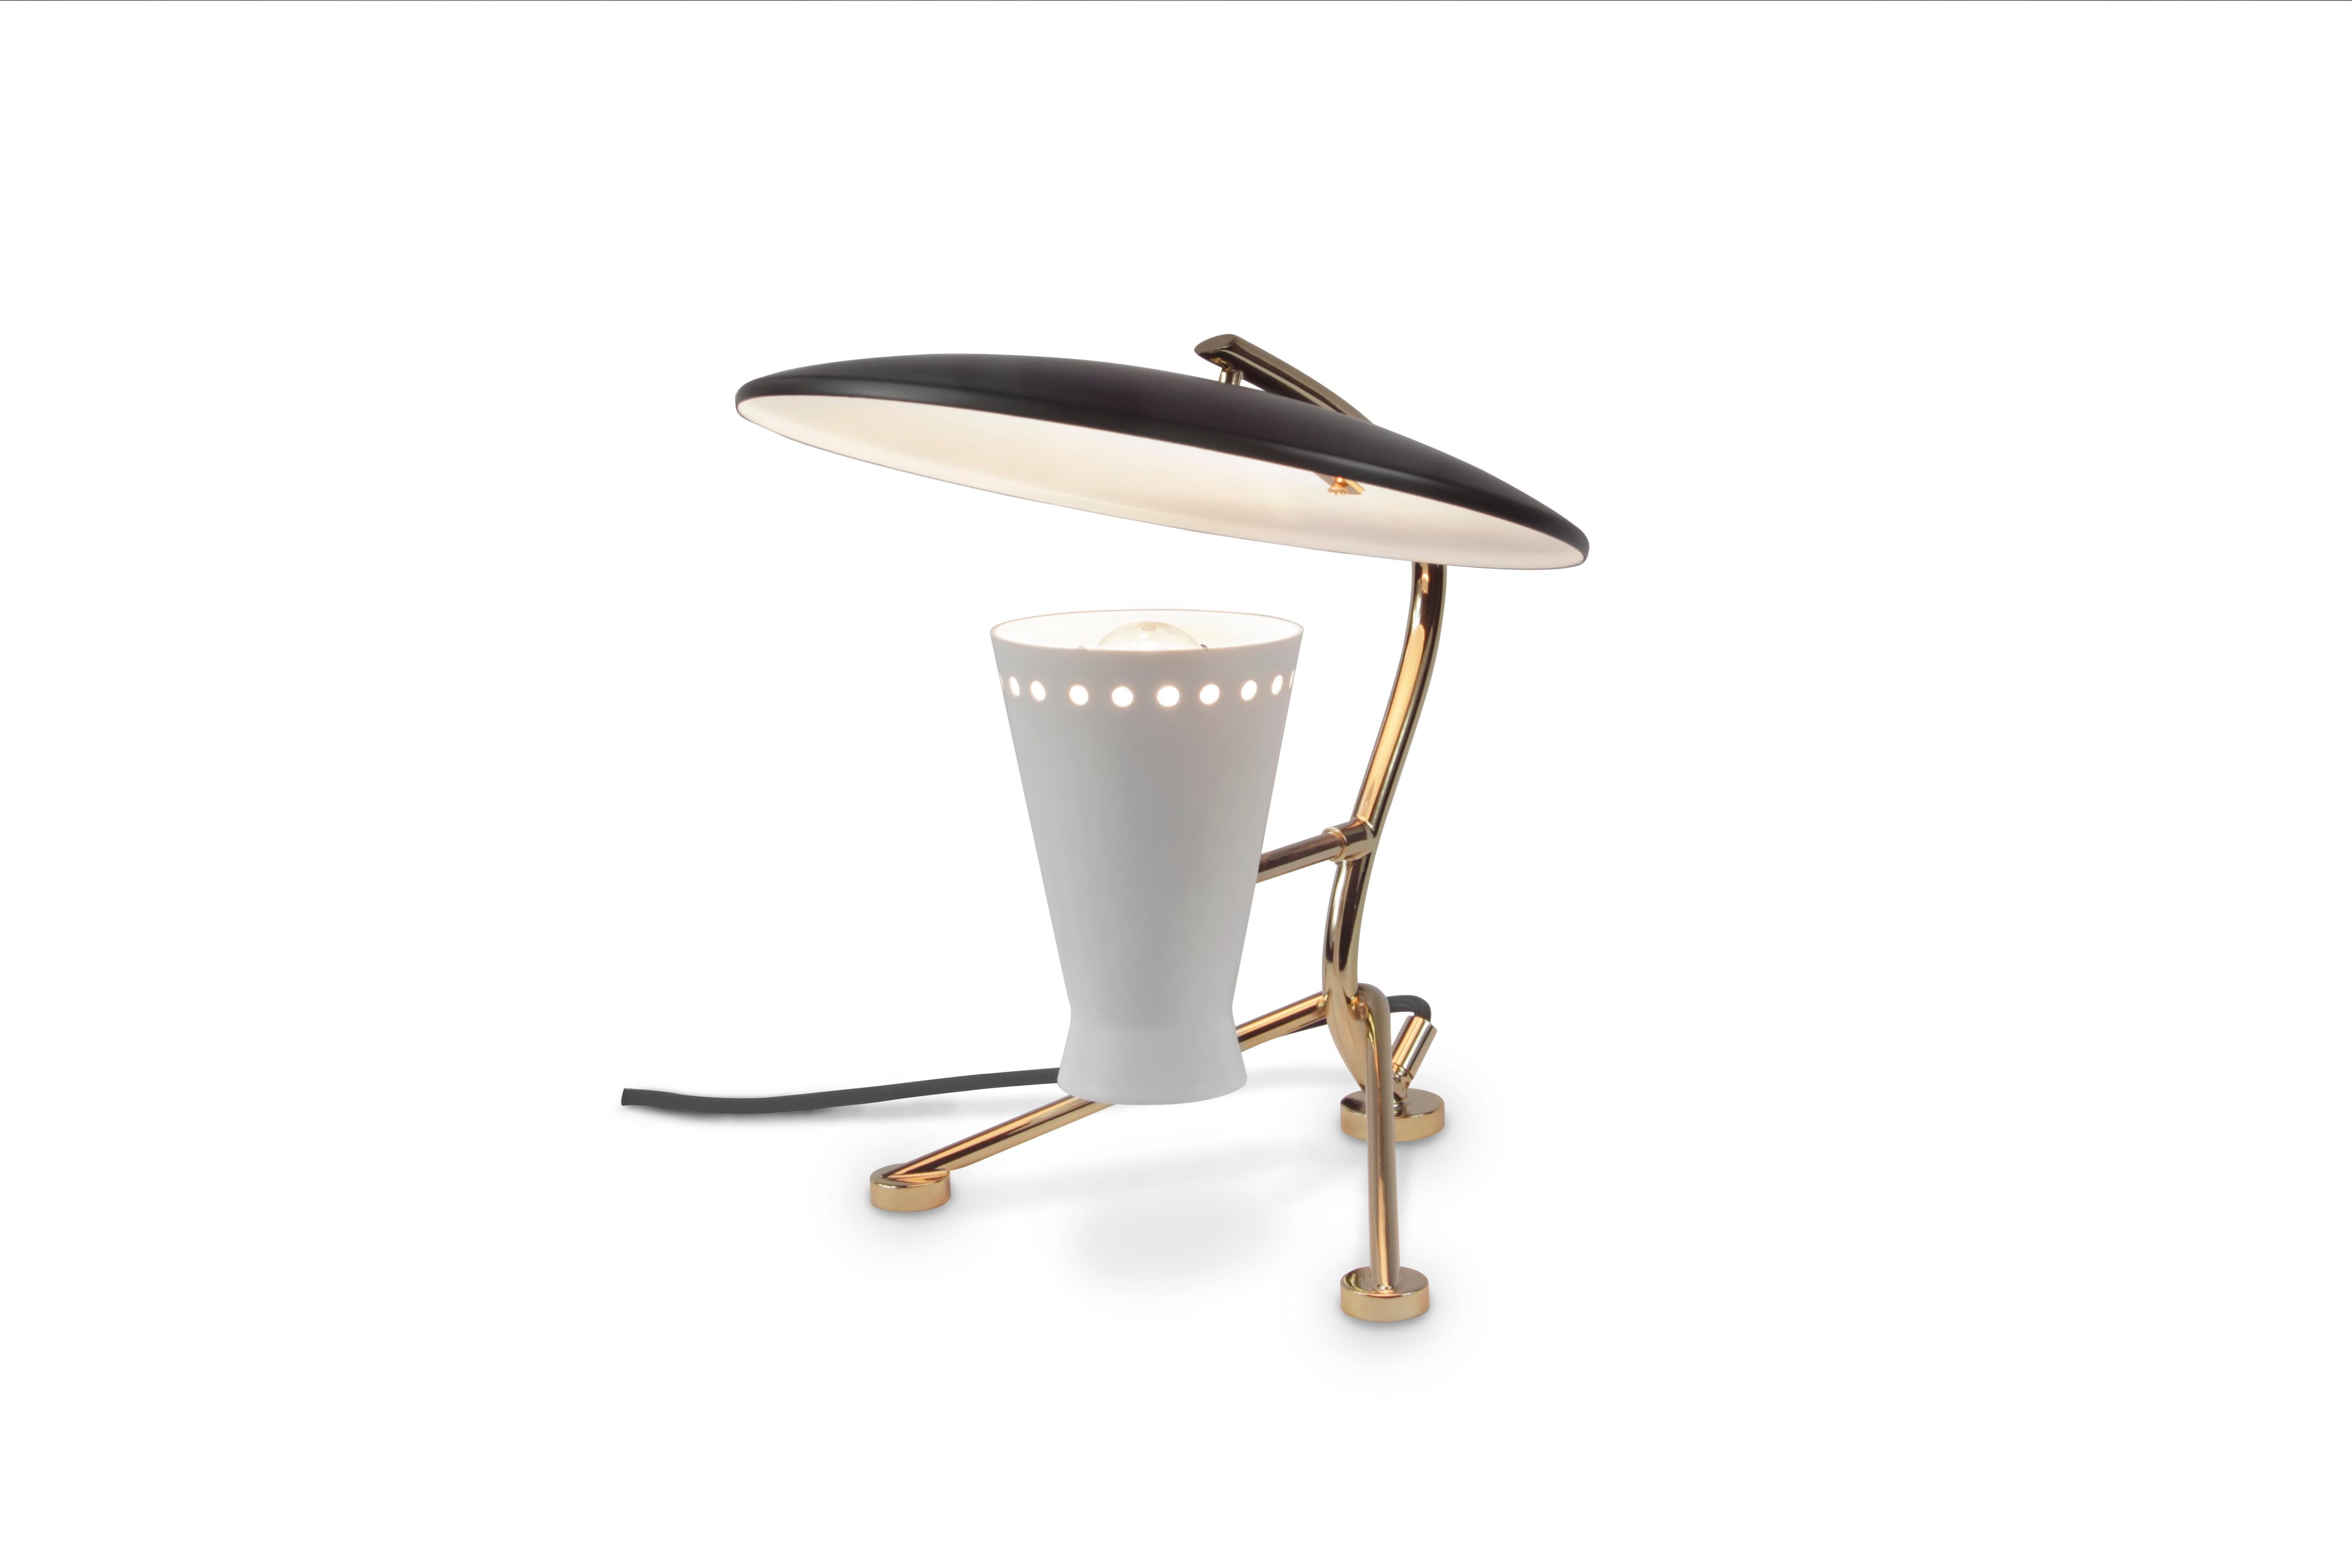 Representing everything that a tripod table lamp should be, Barry mid-century desk lamp is a handmade piece produced in Portugal by some of the finest artisans in the business. This brass lighting design features a shade and a top cover made of